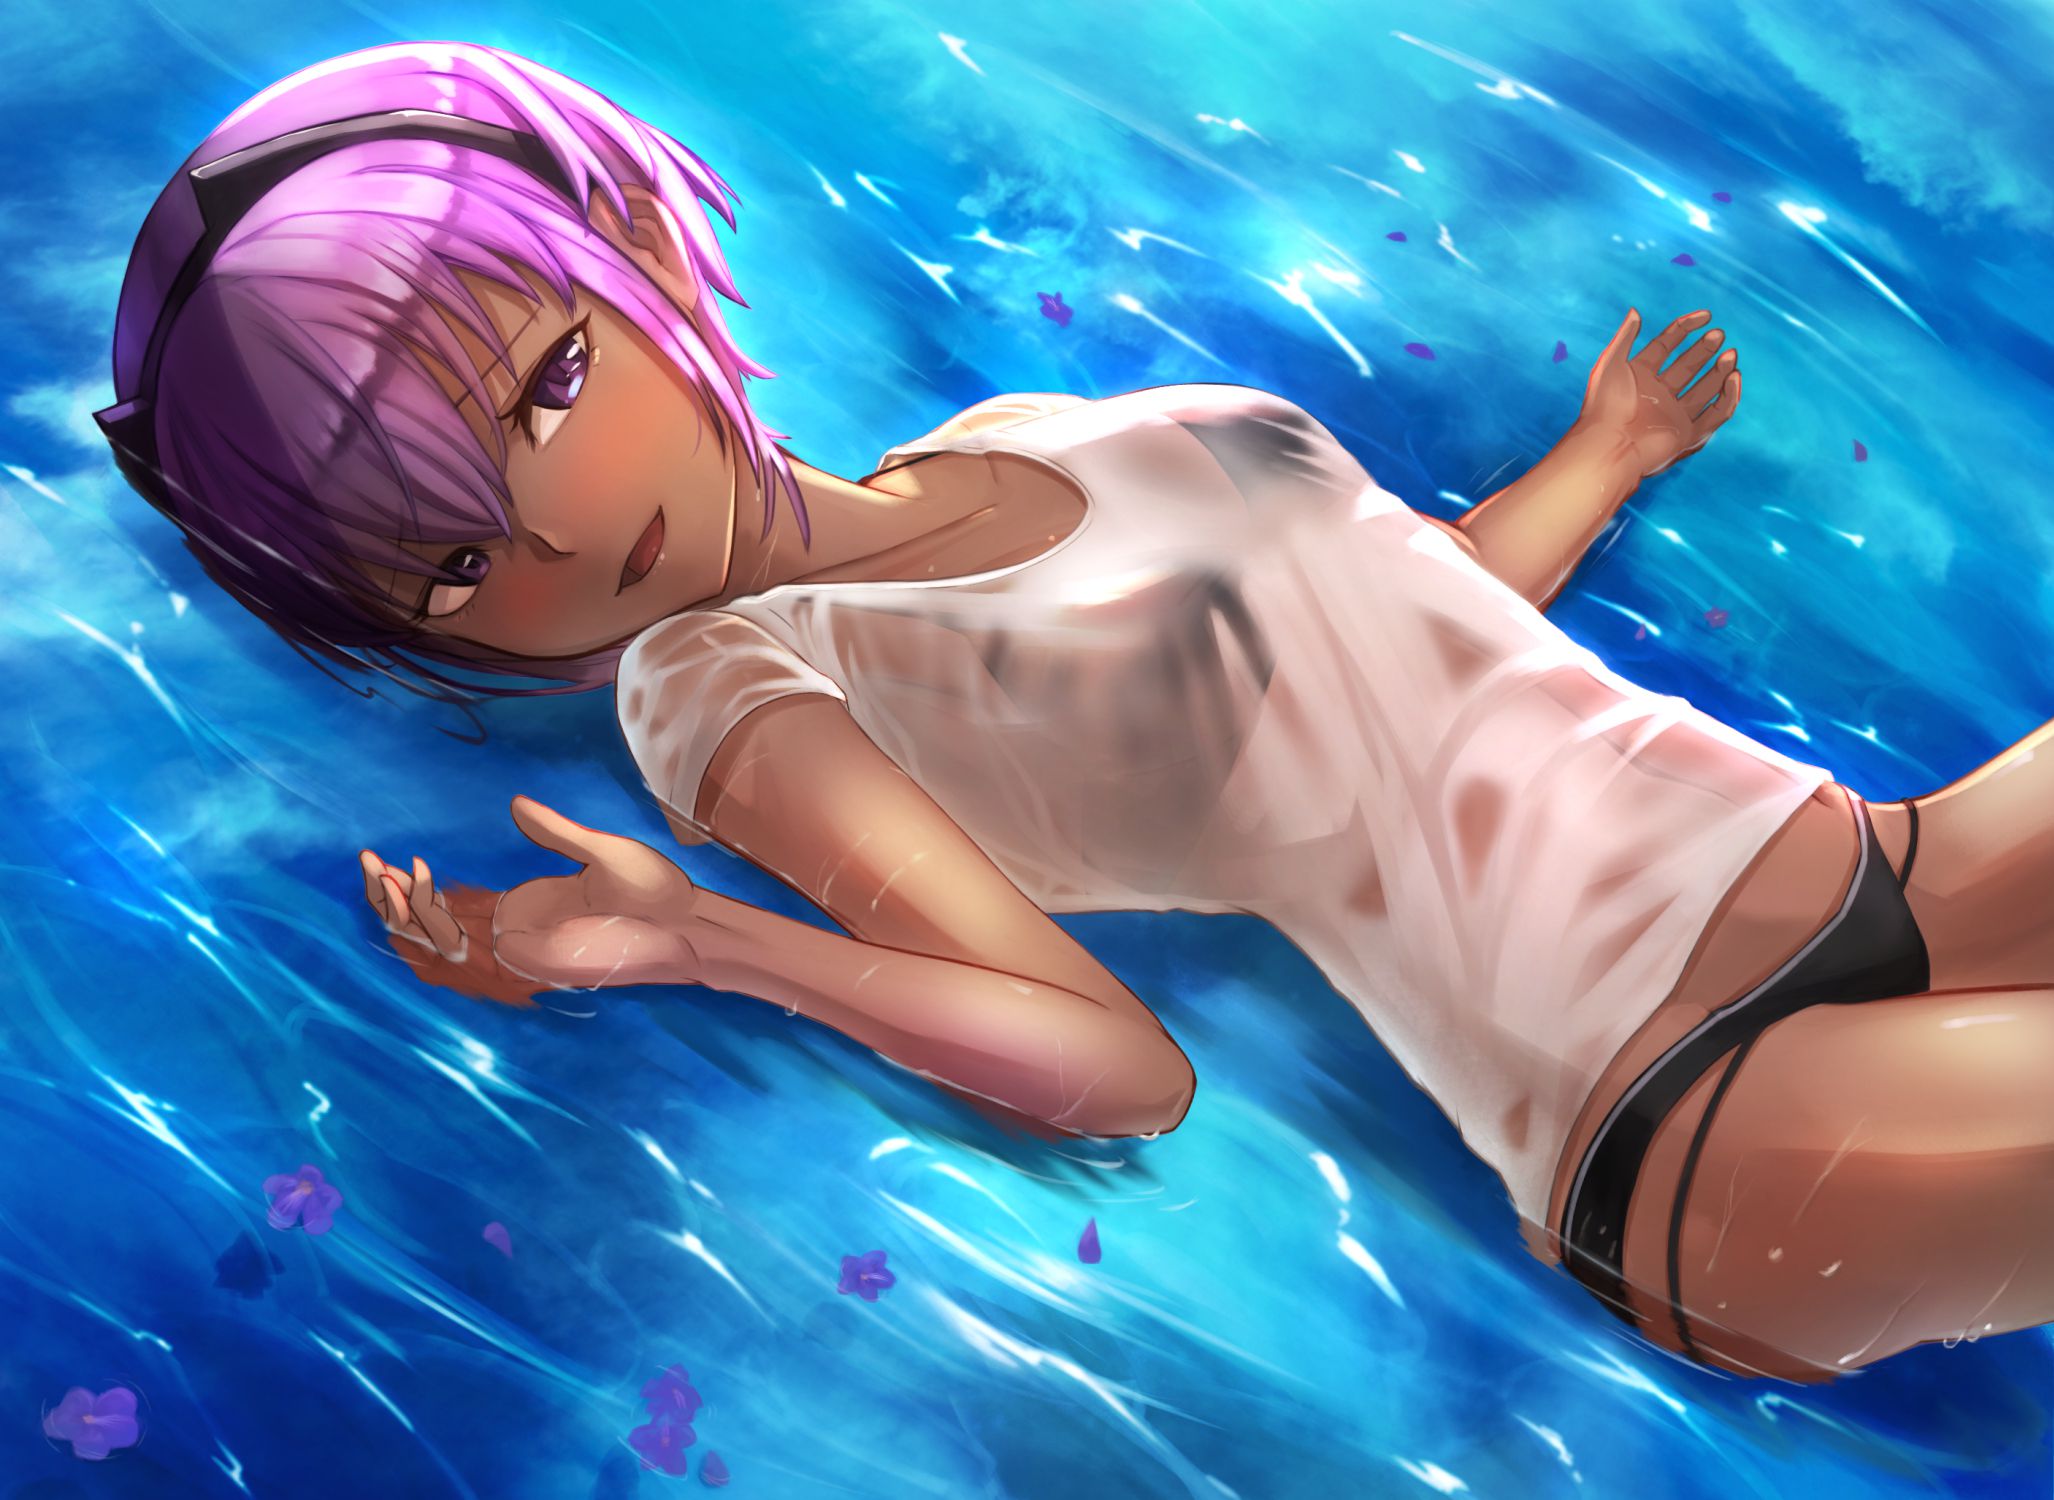 Erotic anime summary Erotic image collection of wet transparent beauties and beautiful girls that are variously transparent [50 sheets] 38